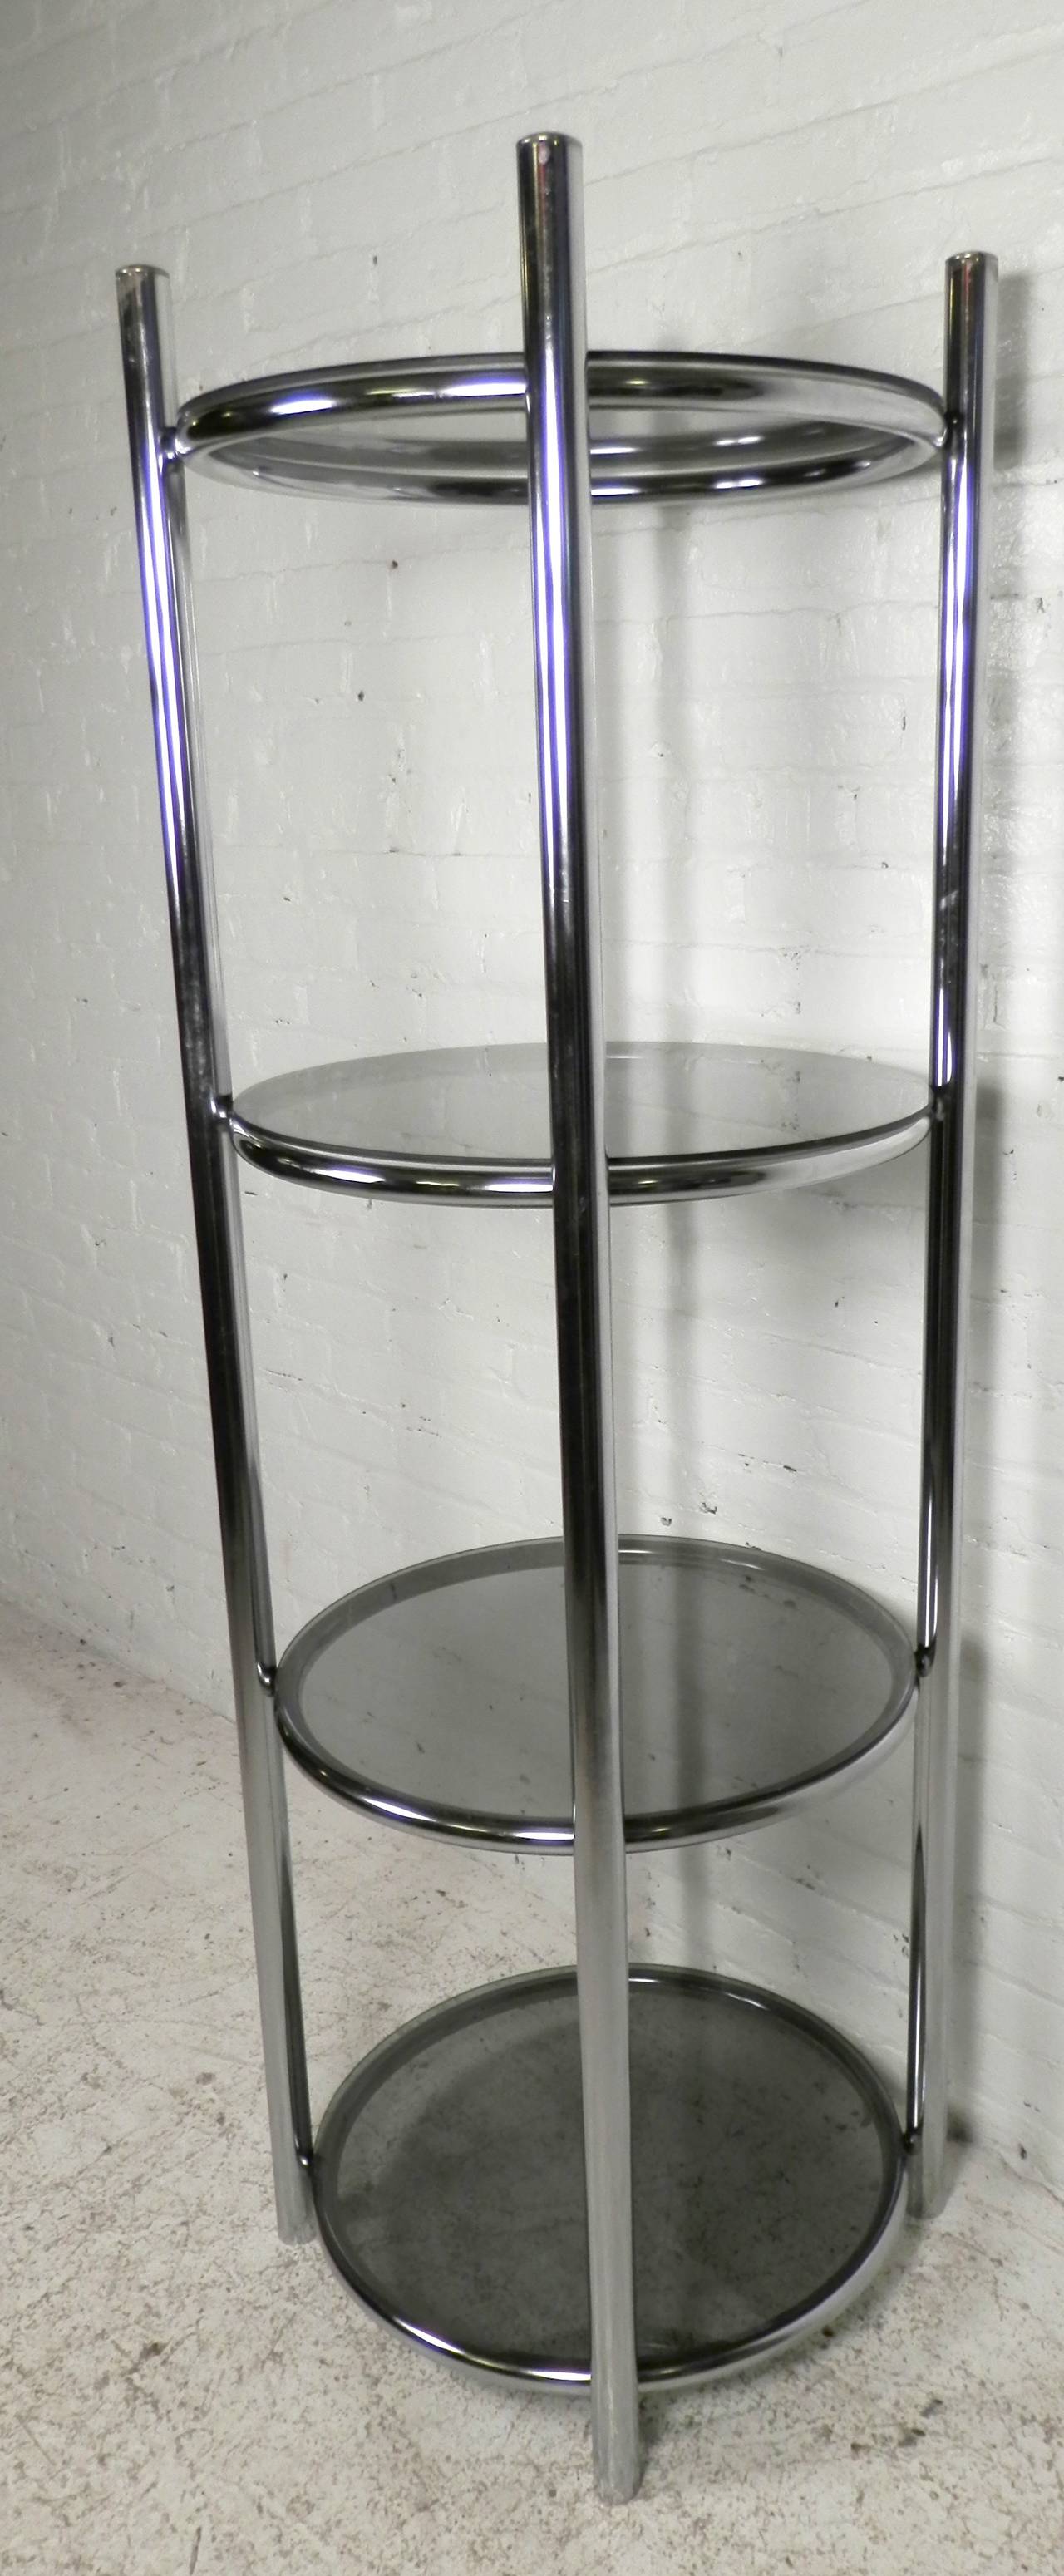 Mid-century modern style shelving unit with four round shelves. Smoked tinted glass compliments the chrome frame nicely. This is a great display choice for smaller rooms.

(Please confirm item location - NY or NJ - with dealer)